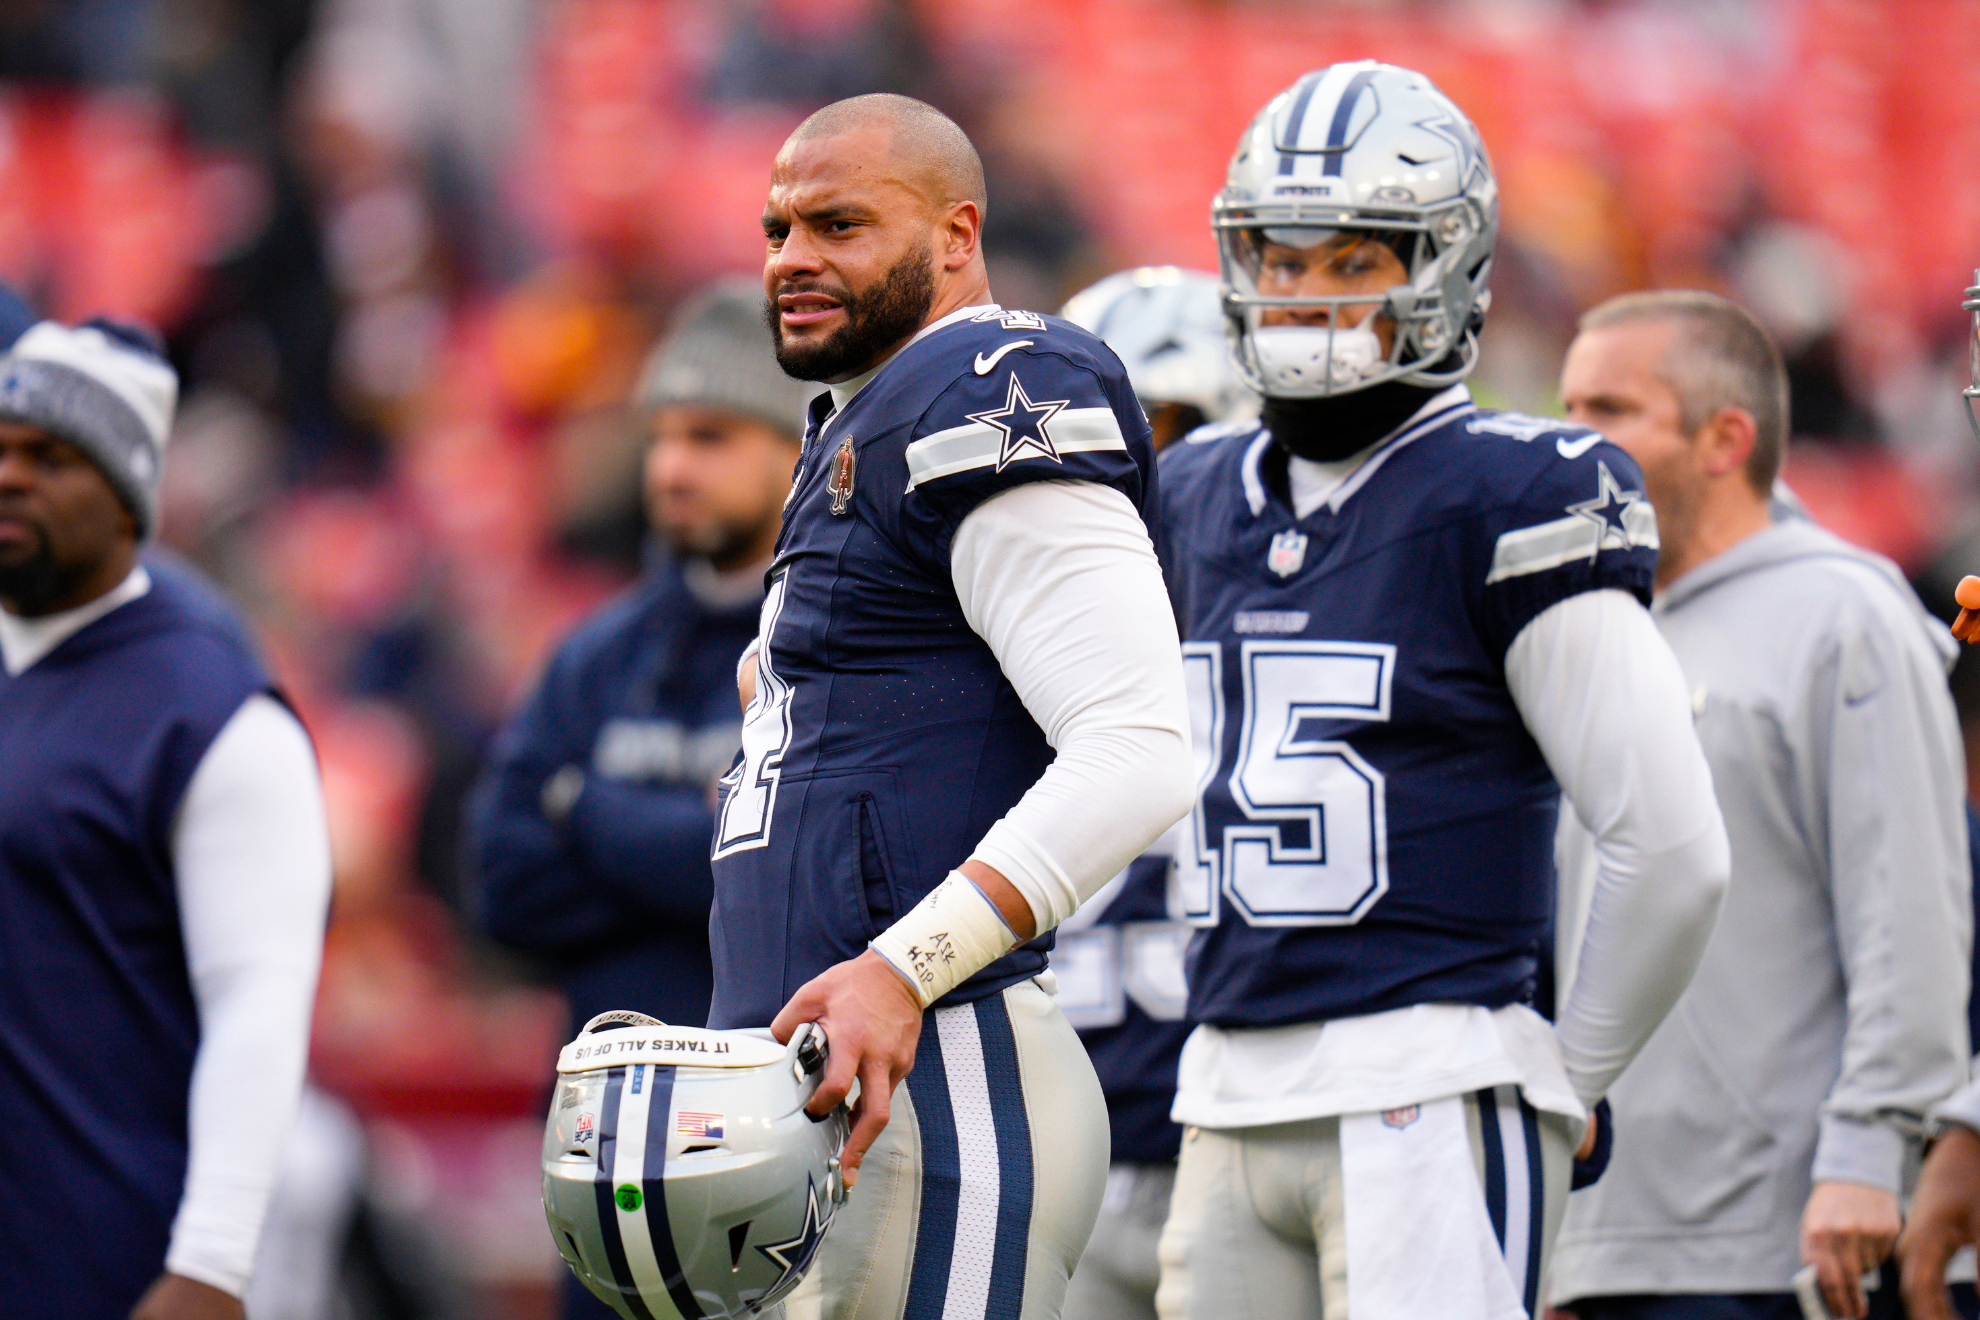 Could Dak Prescott be on the hot seat following the loss?